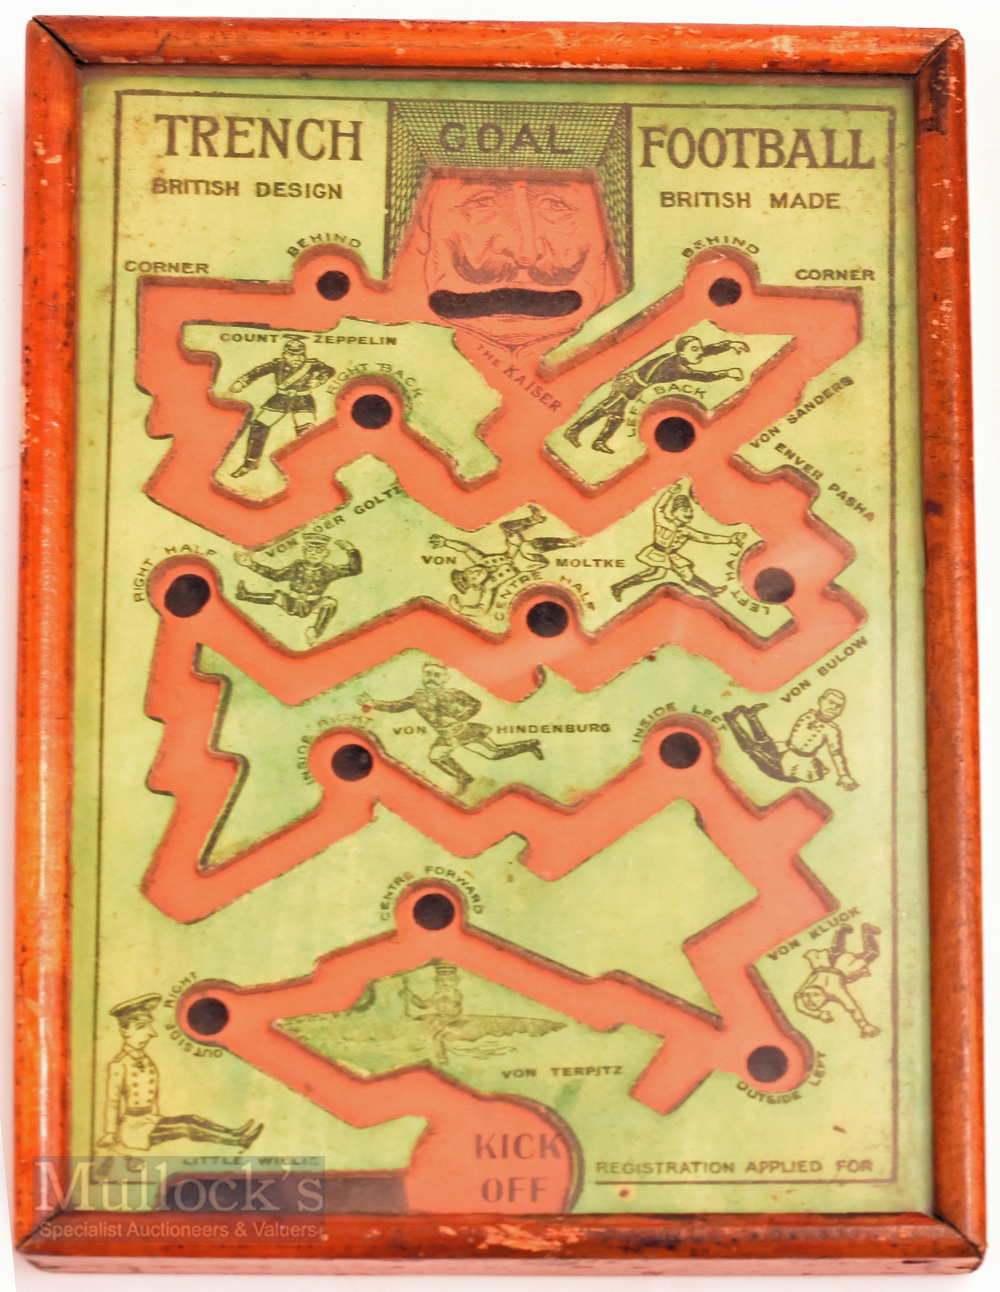 WWI Trench football game made 1915 - Green and on laid orange card boards with cut-out game design - Image 2 of 3